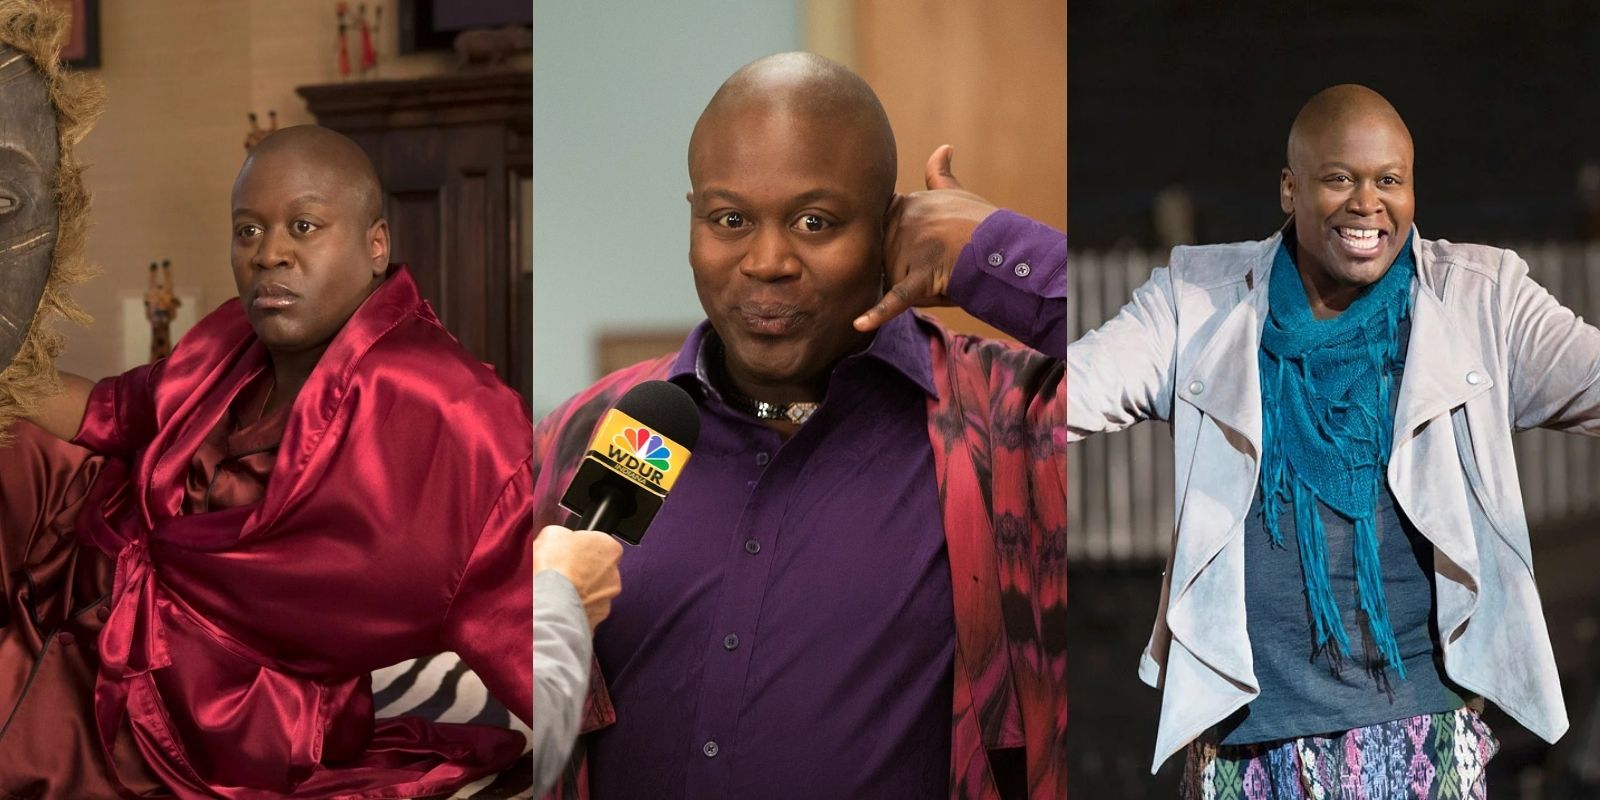 Titus Andromedon poses in a silk robe, gives an interview in a microphone, and sings while gesturing in Unbreakable Kimmy Schmidt